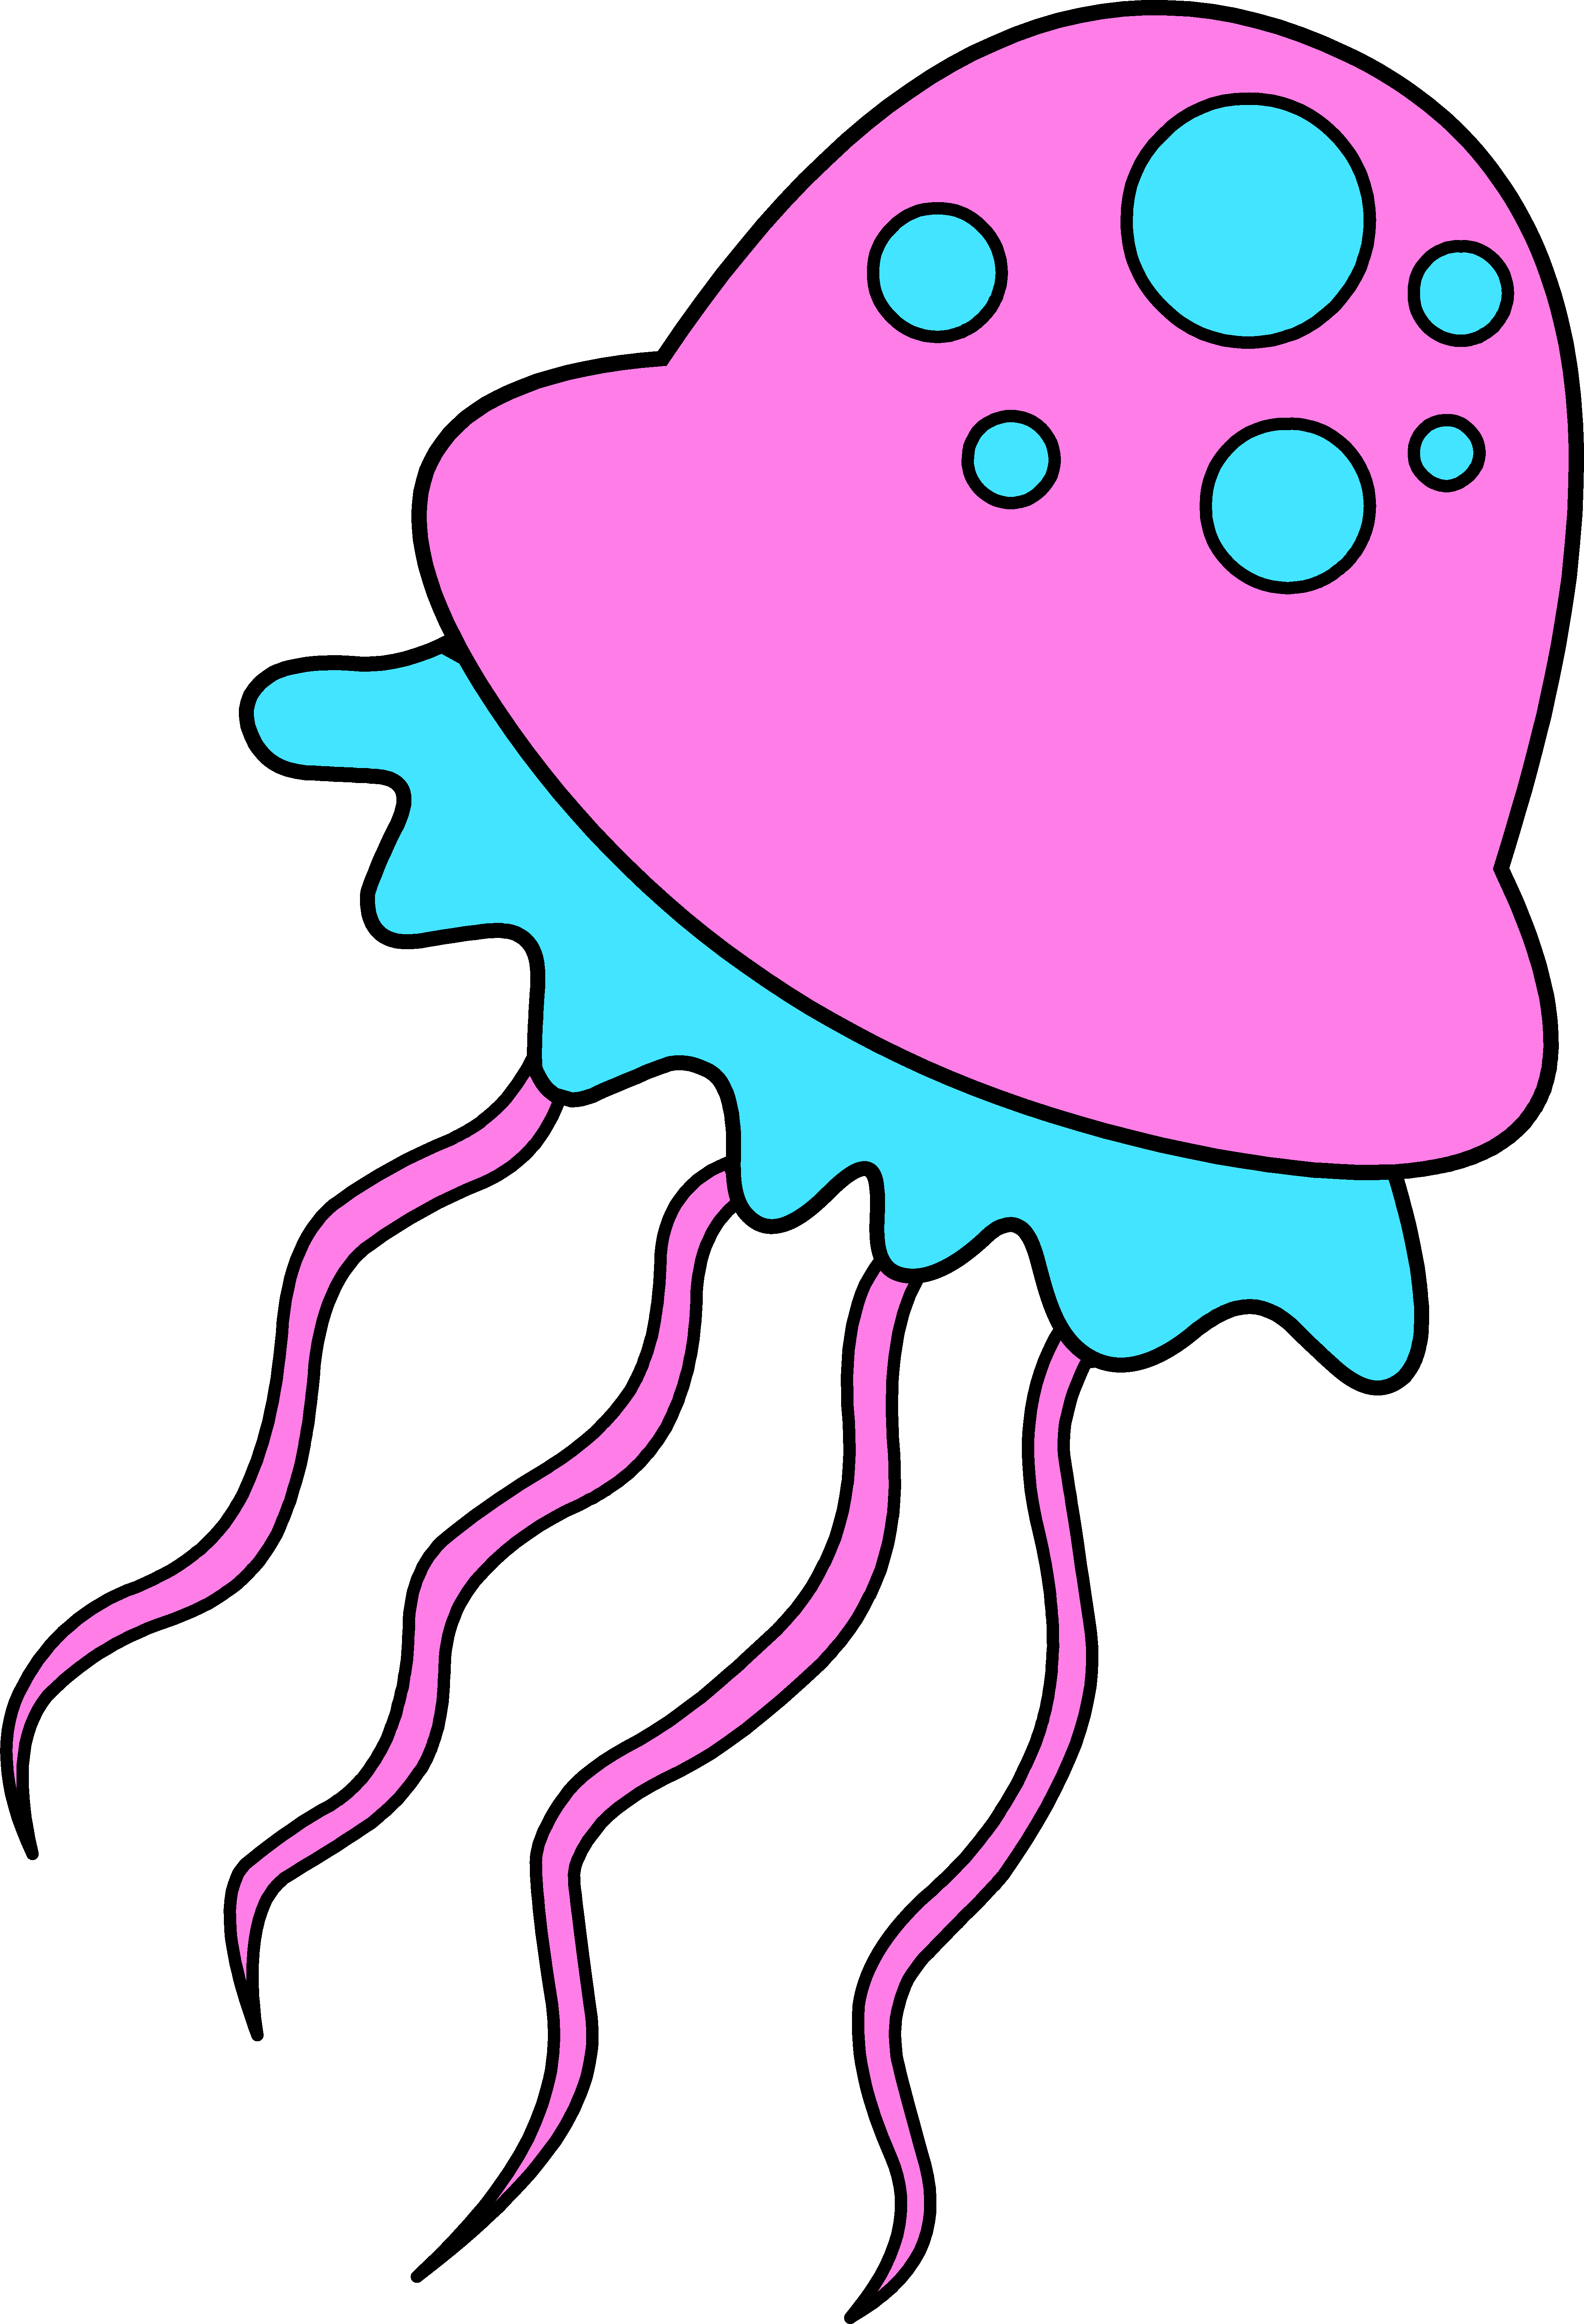 Fish clipart design. Pink and blue jellyfish